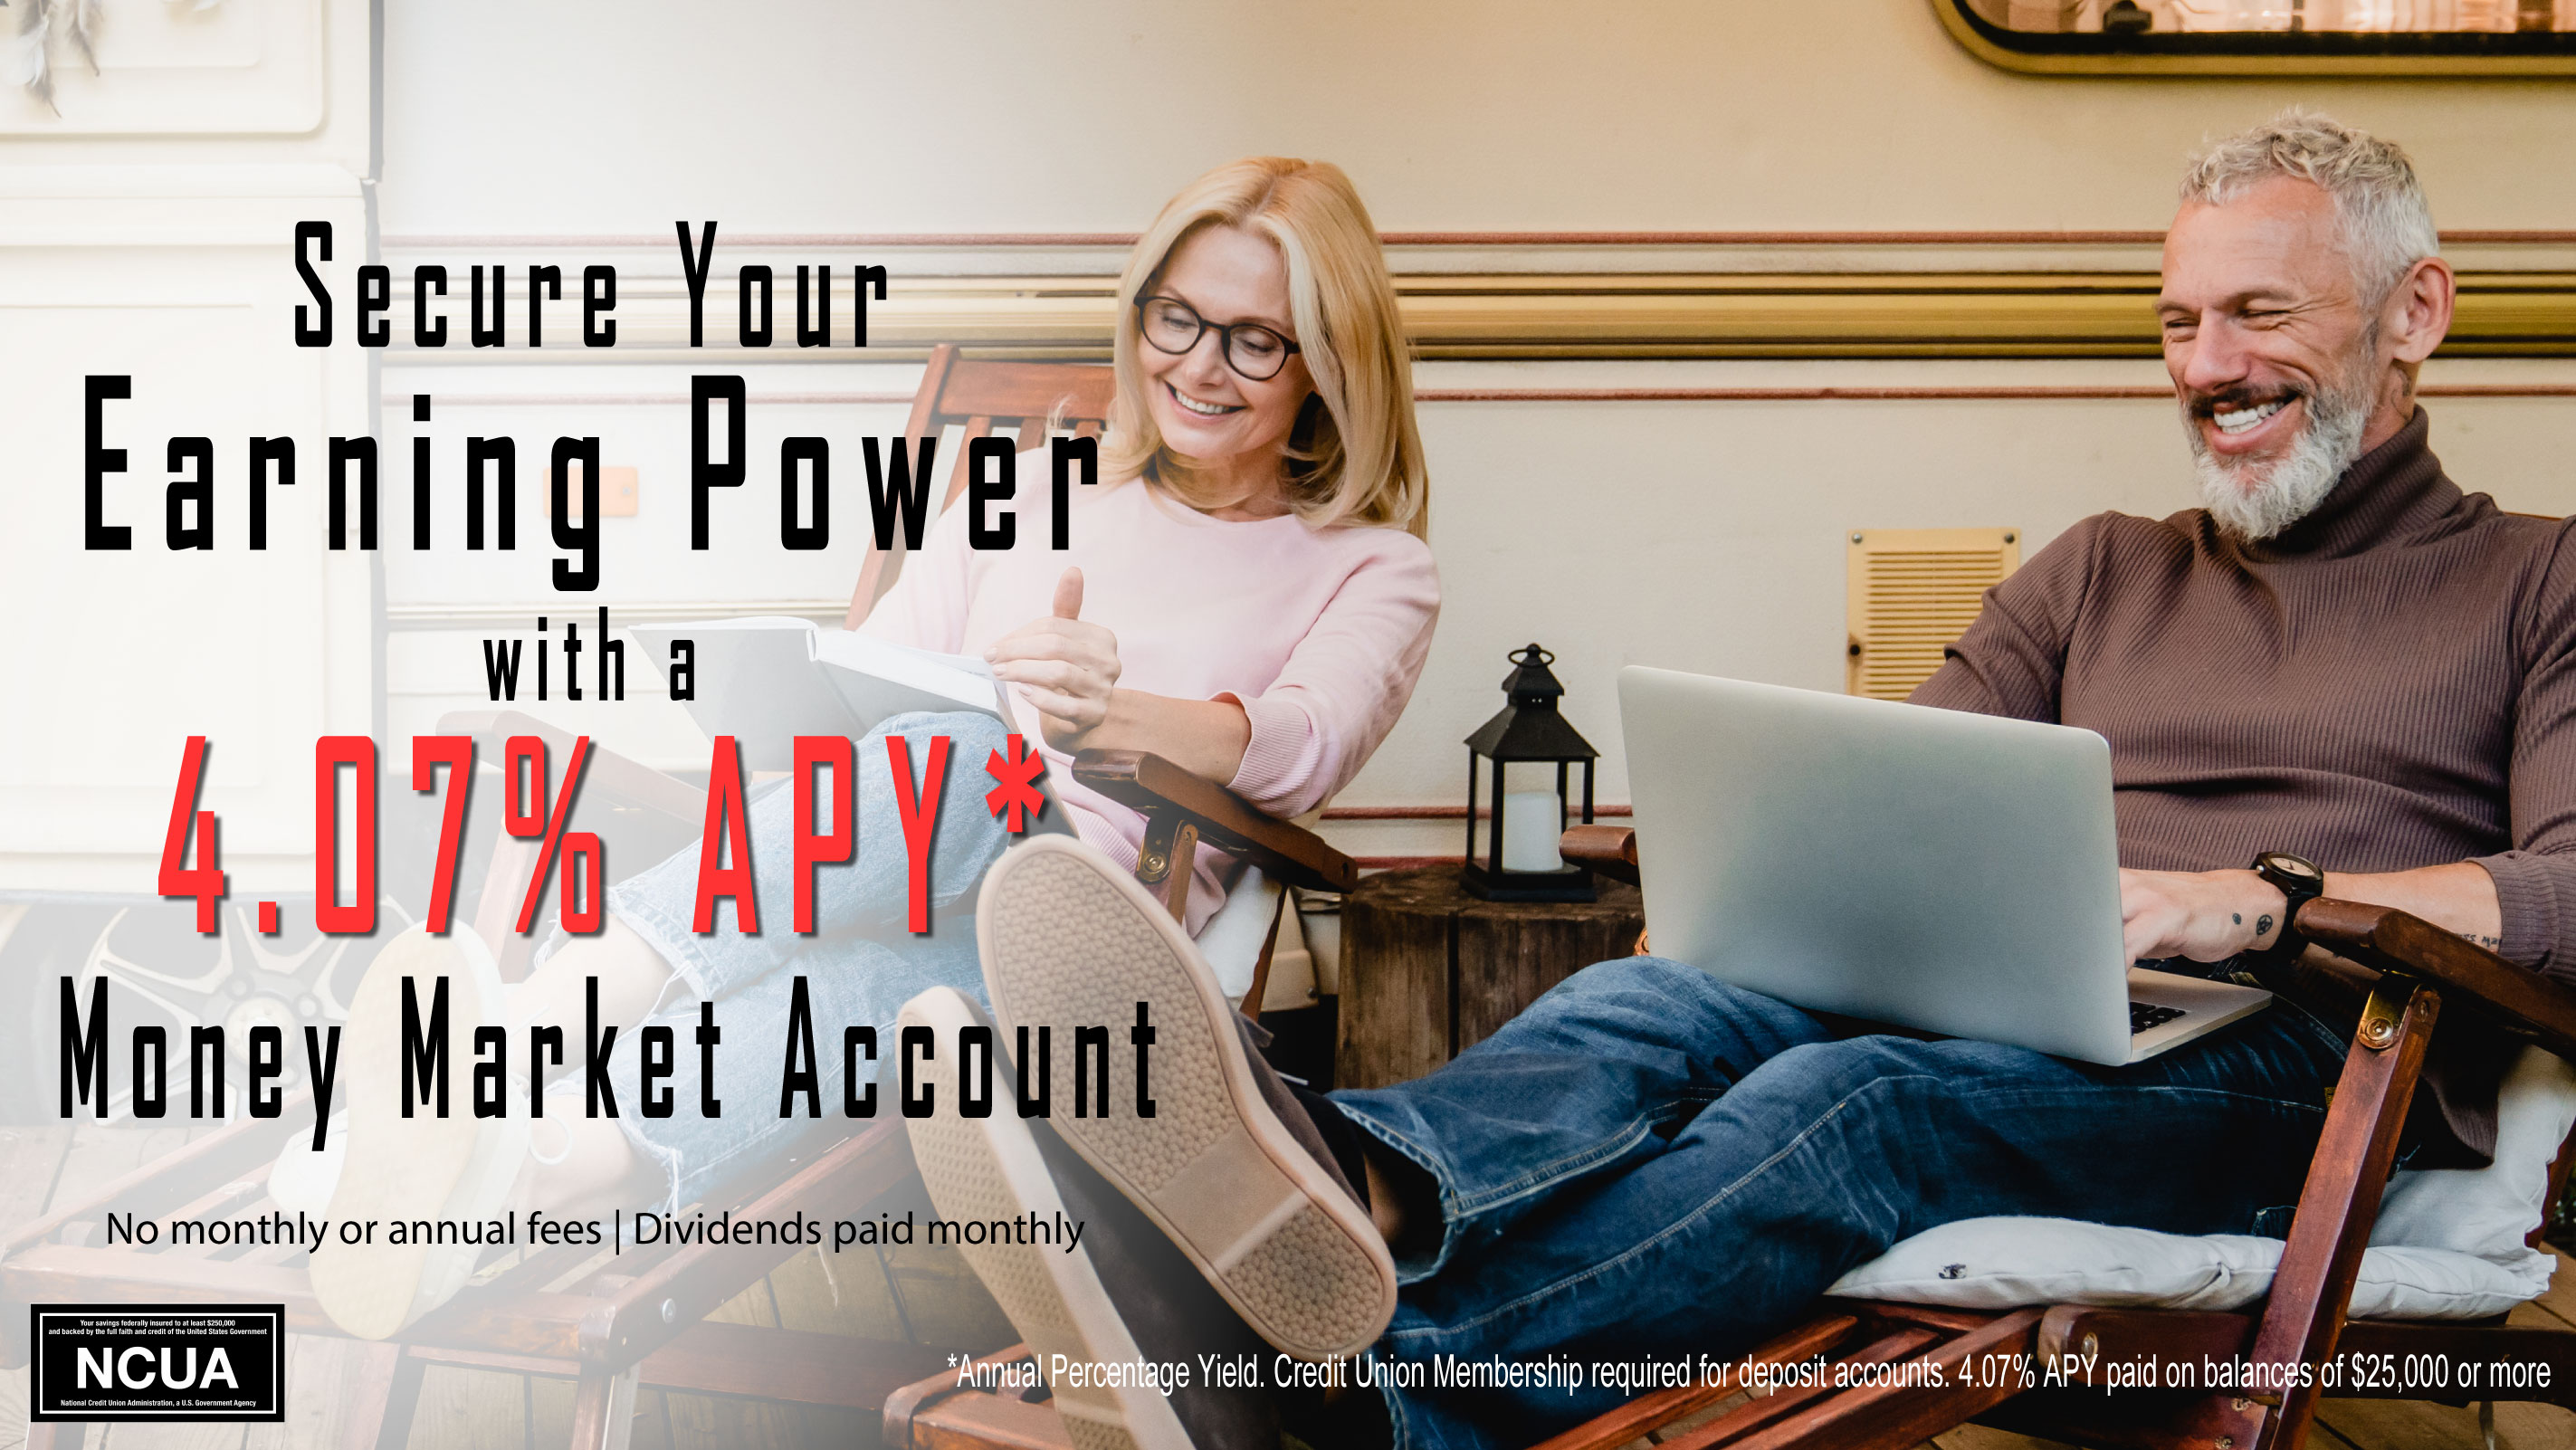 a middle aged couple sits at home. She is reading a book, he is on his laptop computer. The text on the image reads "Secure Your Earning Power with a 4.07% APY* Money Market Account. No Monthly Fes | Dividends paid monthly. *annual percentage yield. Credit Union Membership required for deposit accounts. 4.07% paid on balances of $25,000 or more." The NCUA logo is in the bottom left corner.